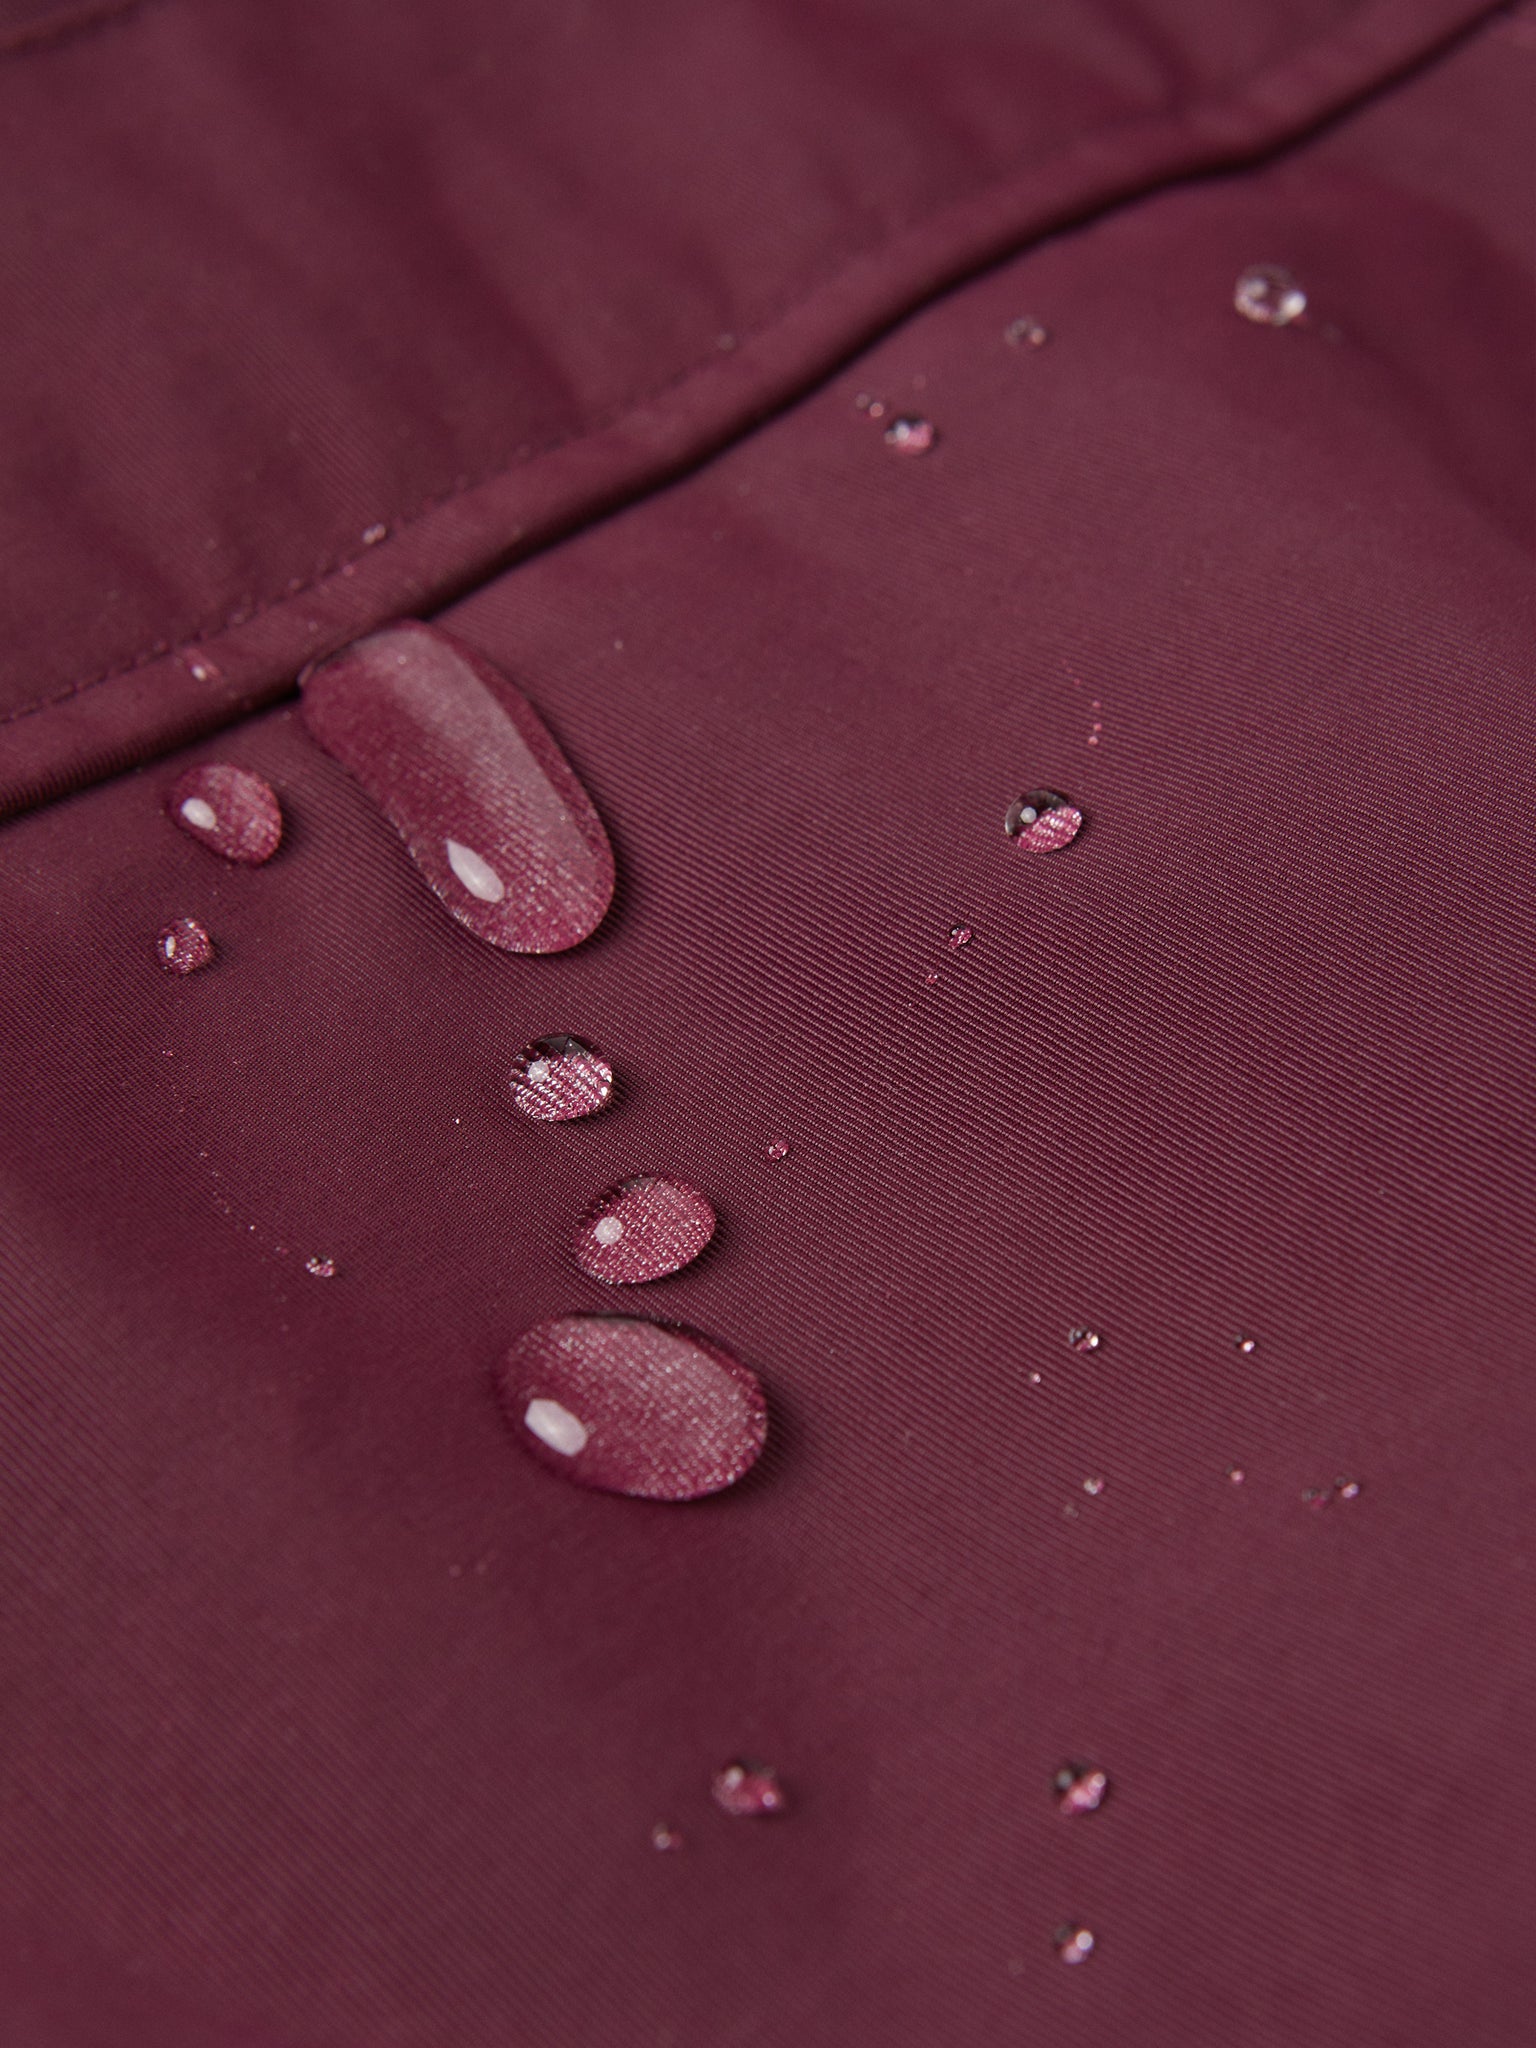 Kids Burgundy Waterproof Shell Jacket from the Polarn O. Pyret outerwear collection. Ethically produced kids outerwear.